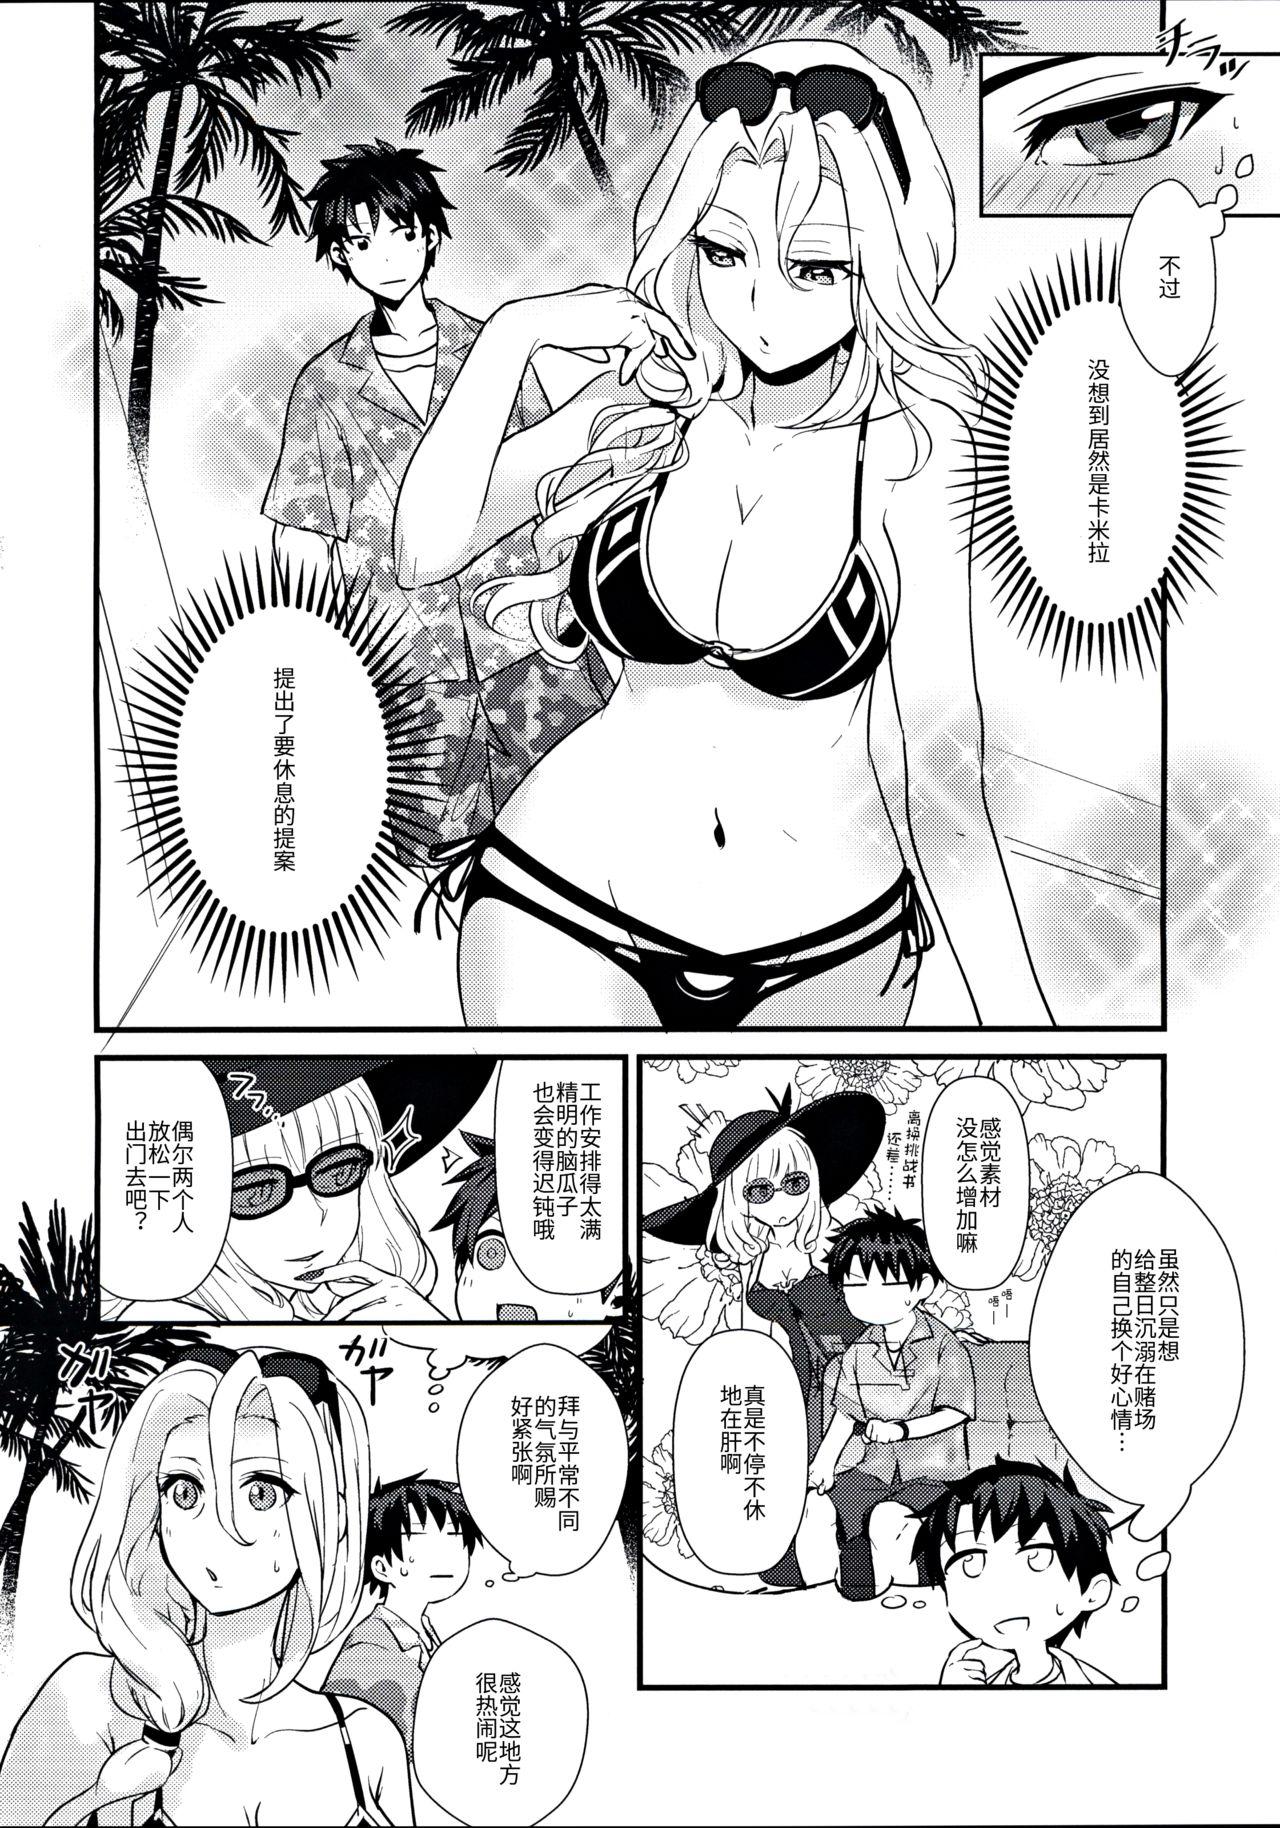 Lick POOL SIDE MIRAGE - Fate grand order Tittyfuck - Page 4